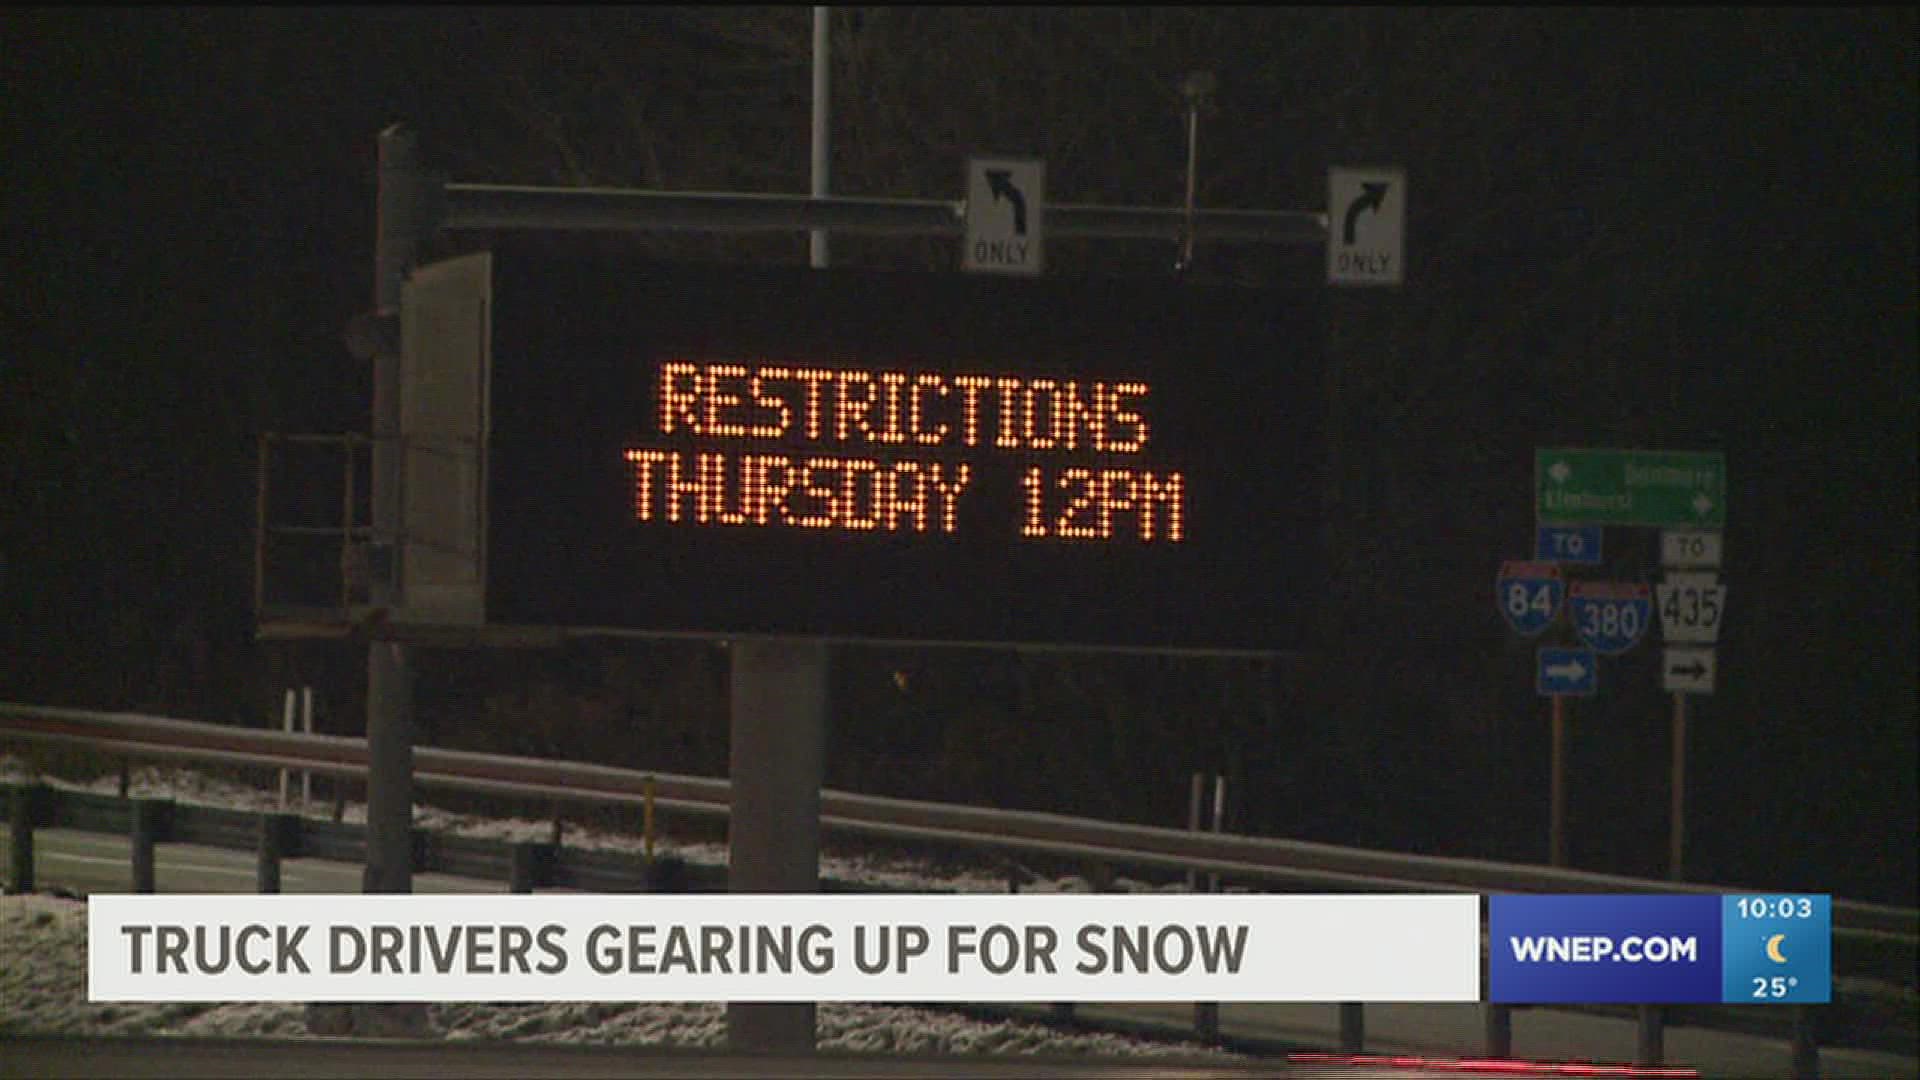 Truck drivers and snow removal services react to the snowstorm expected to hit northeastern Pennsylvania.